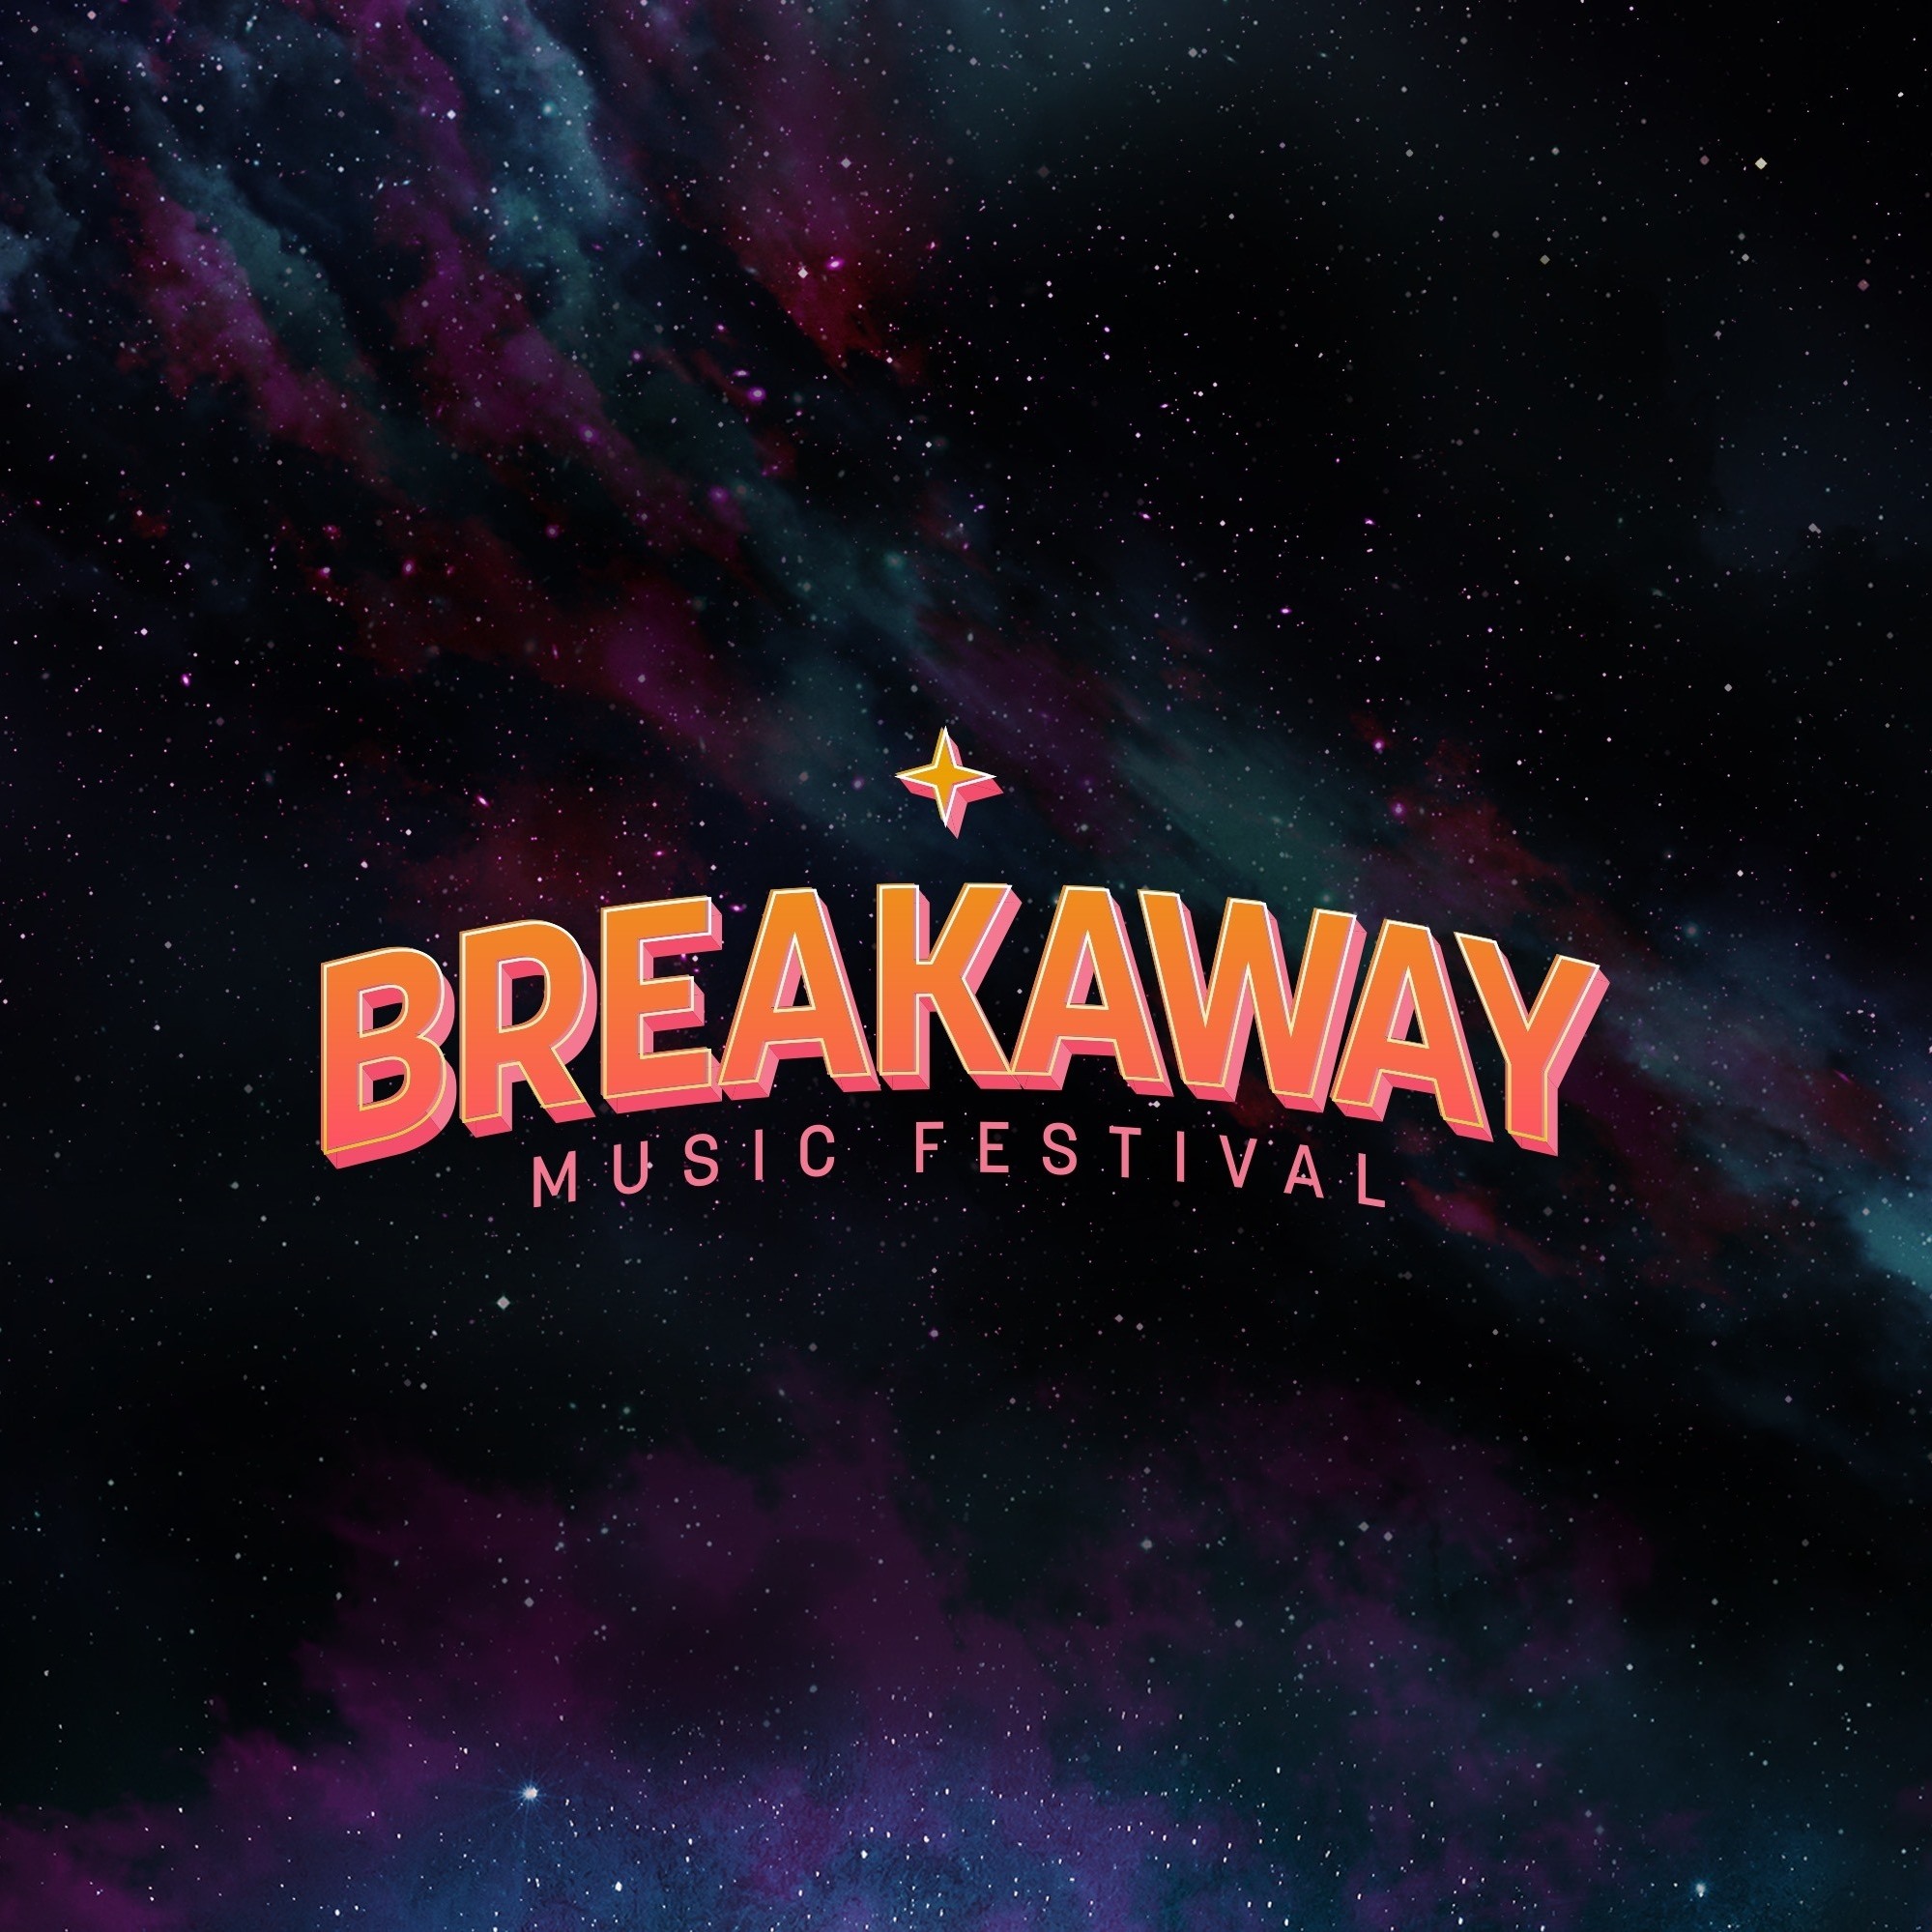 Breakaway Festival Expands in 2020, Adding DC & San Diego to OH, MI, TN